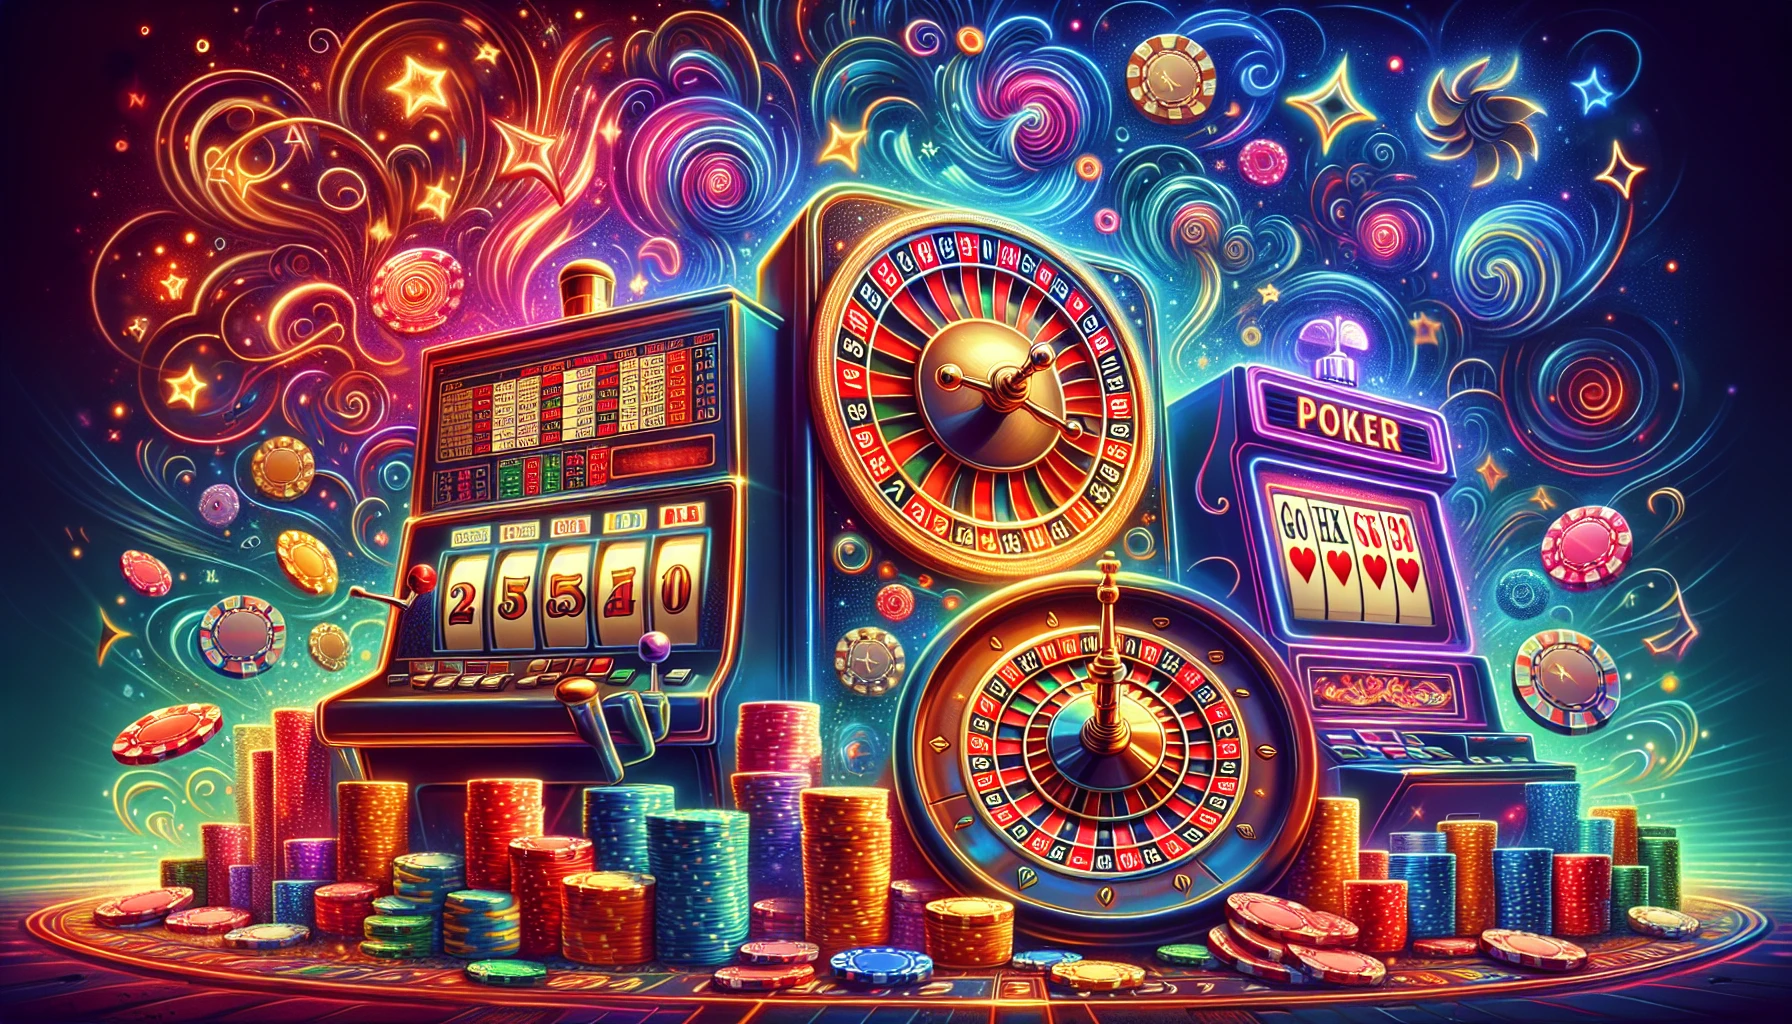 Illustration of promotional offers and bonuses at online casinos